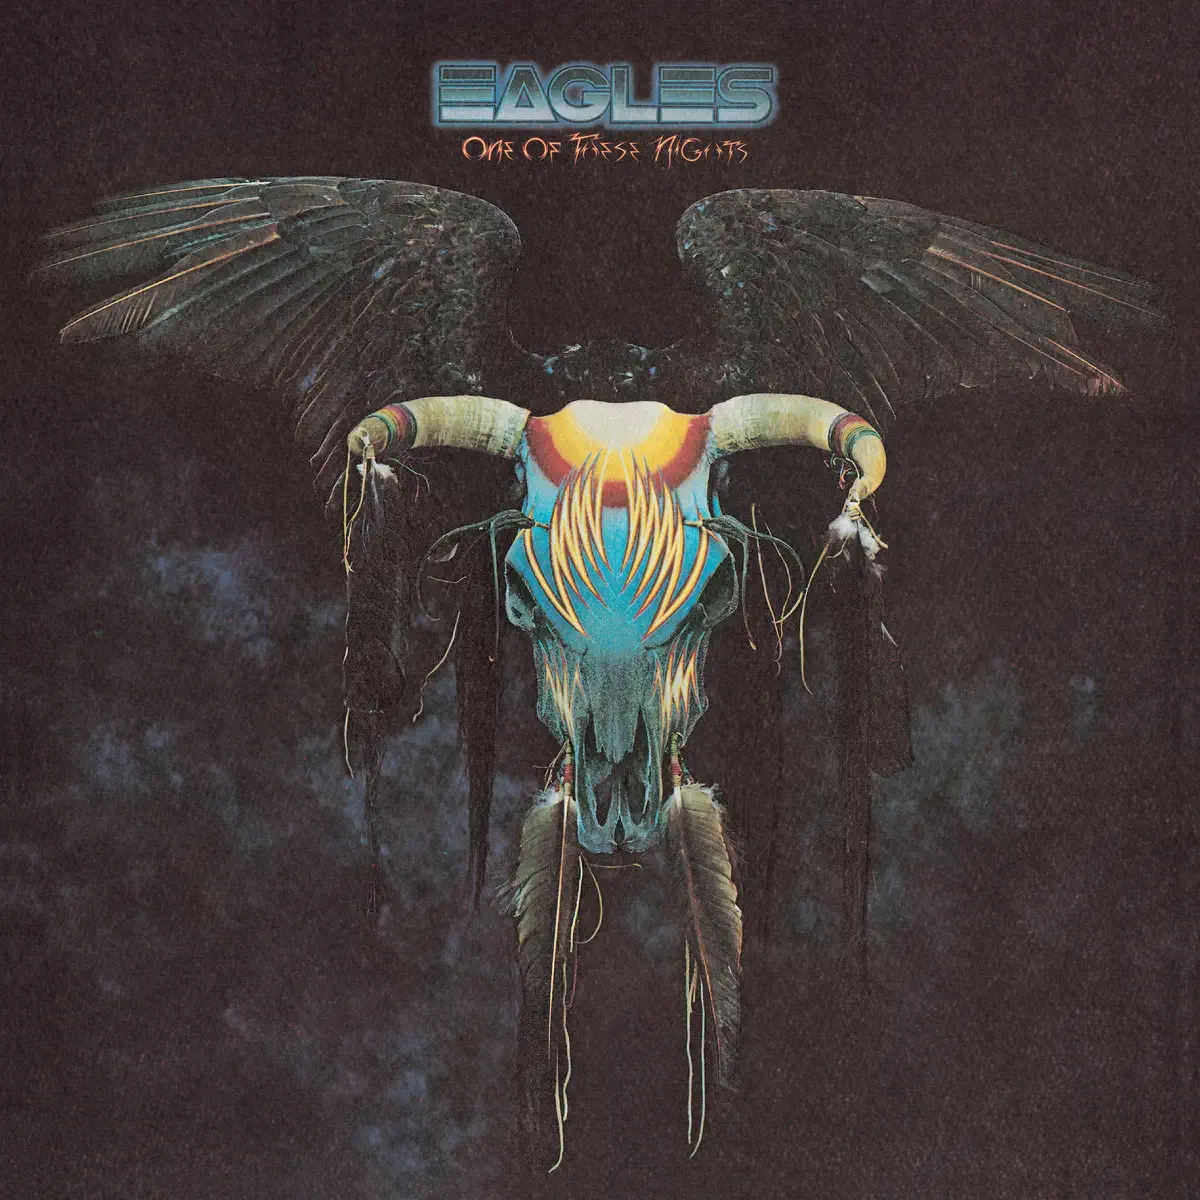 Eagles - One of These Nights (1975) [iTunes Plus AAC M4A]-新房子